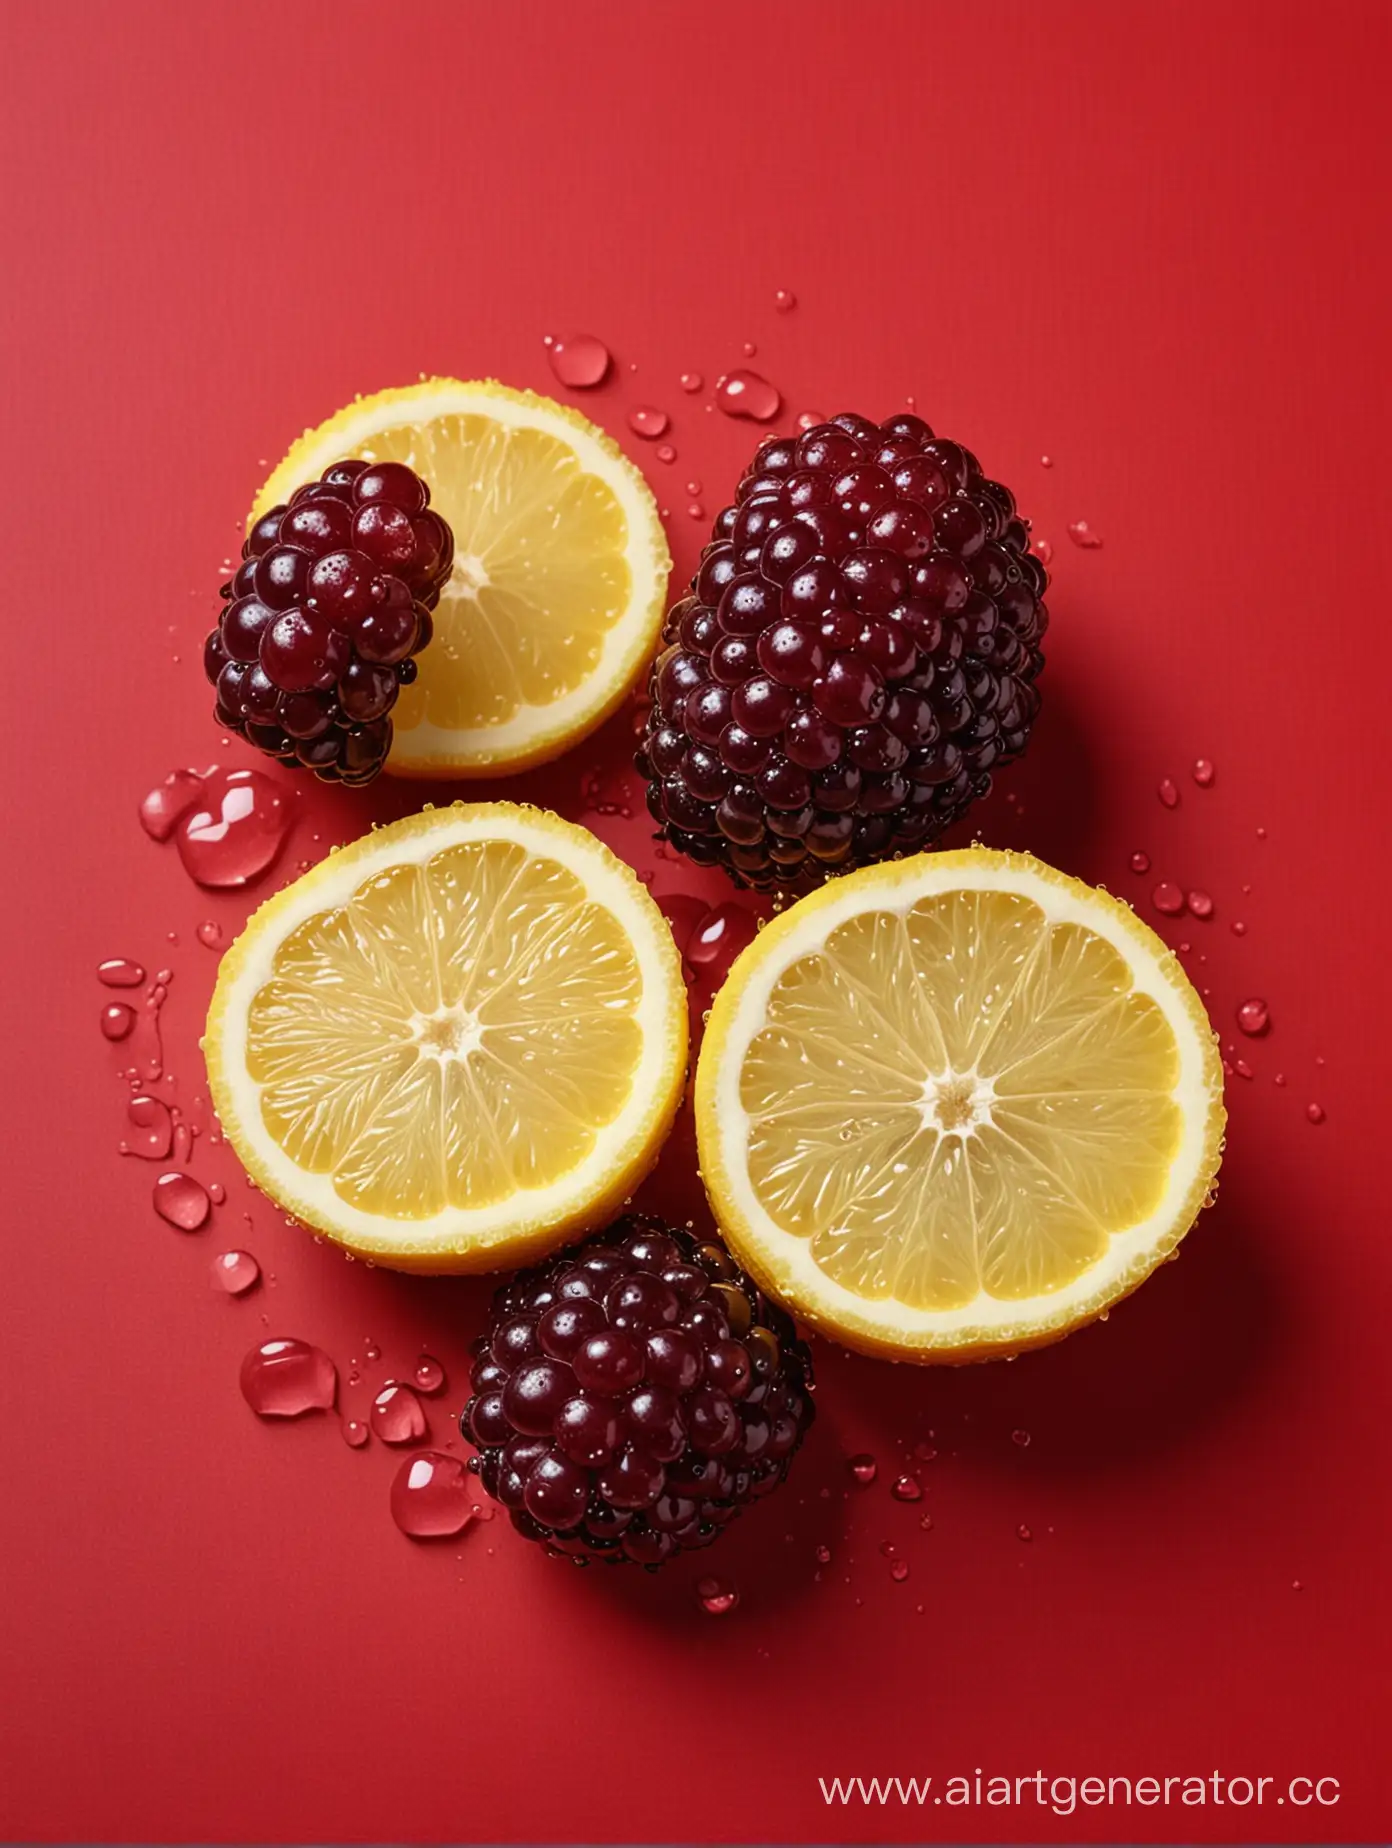 Boysenberry-and-Lemon-Slices-Water-Drop-on-Red-Background